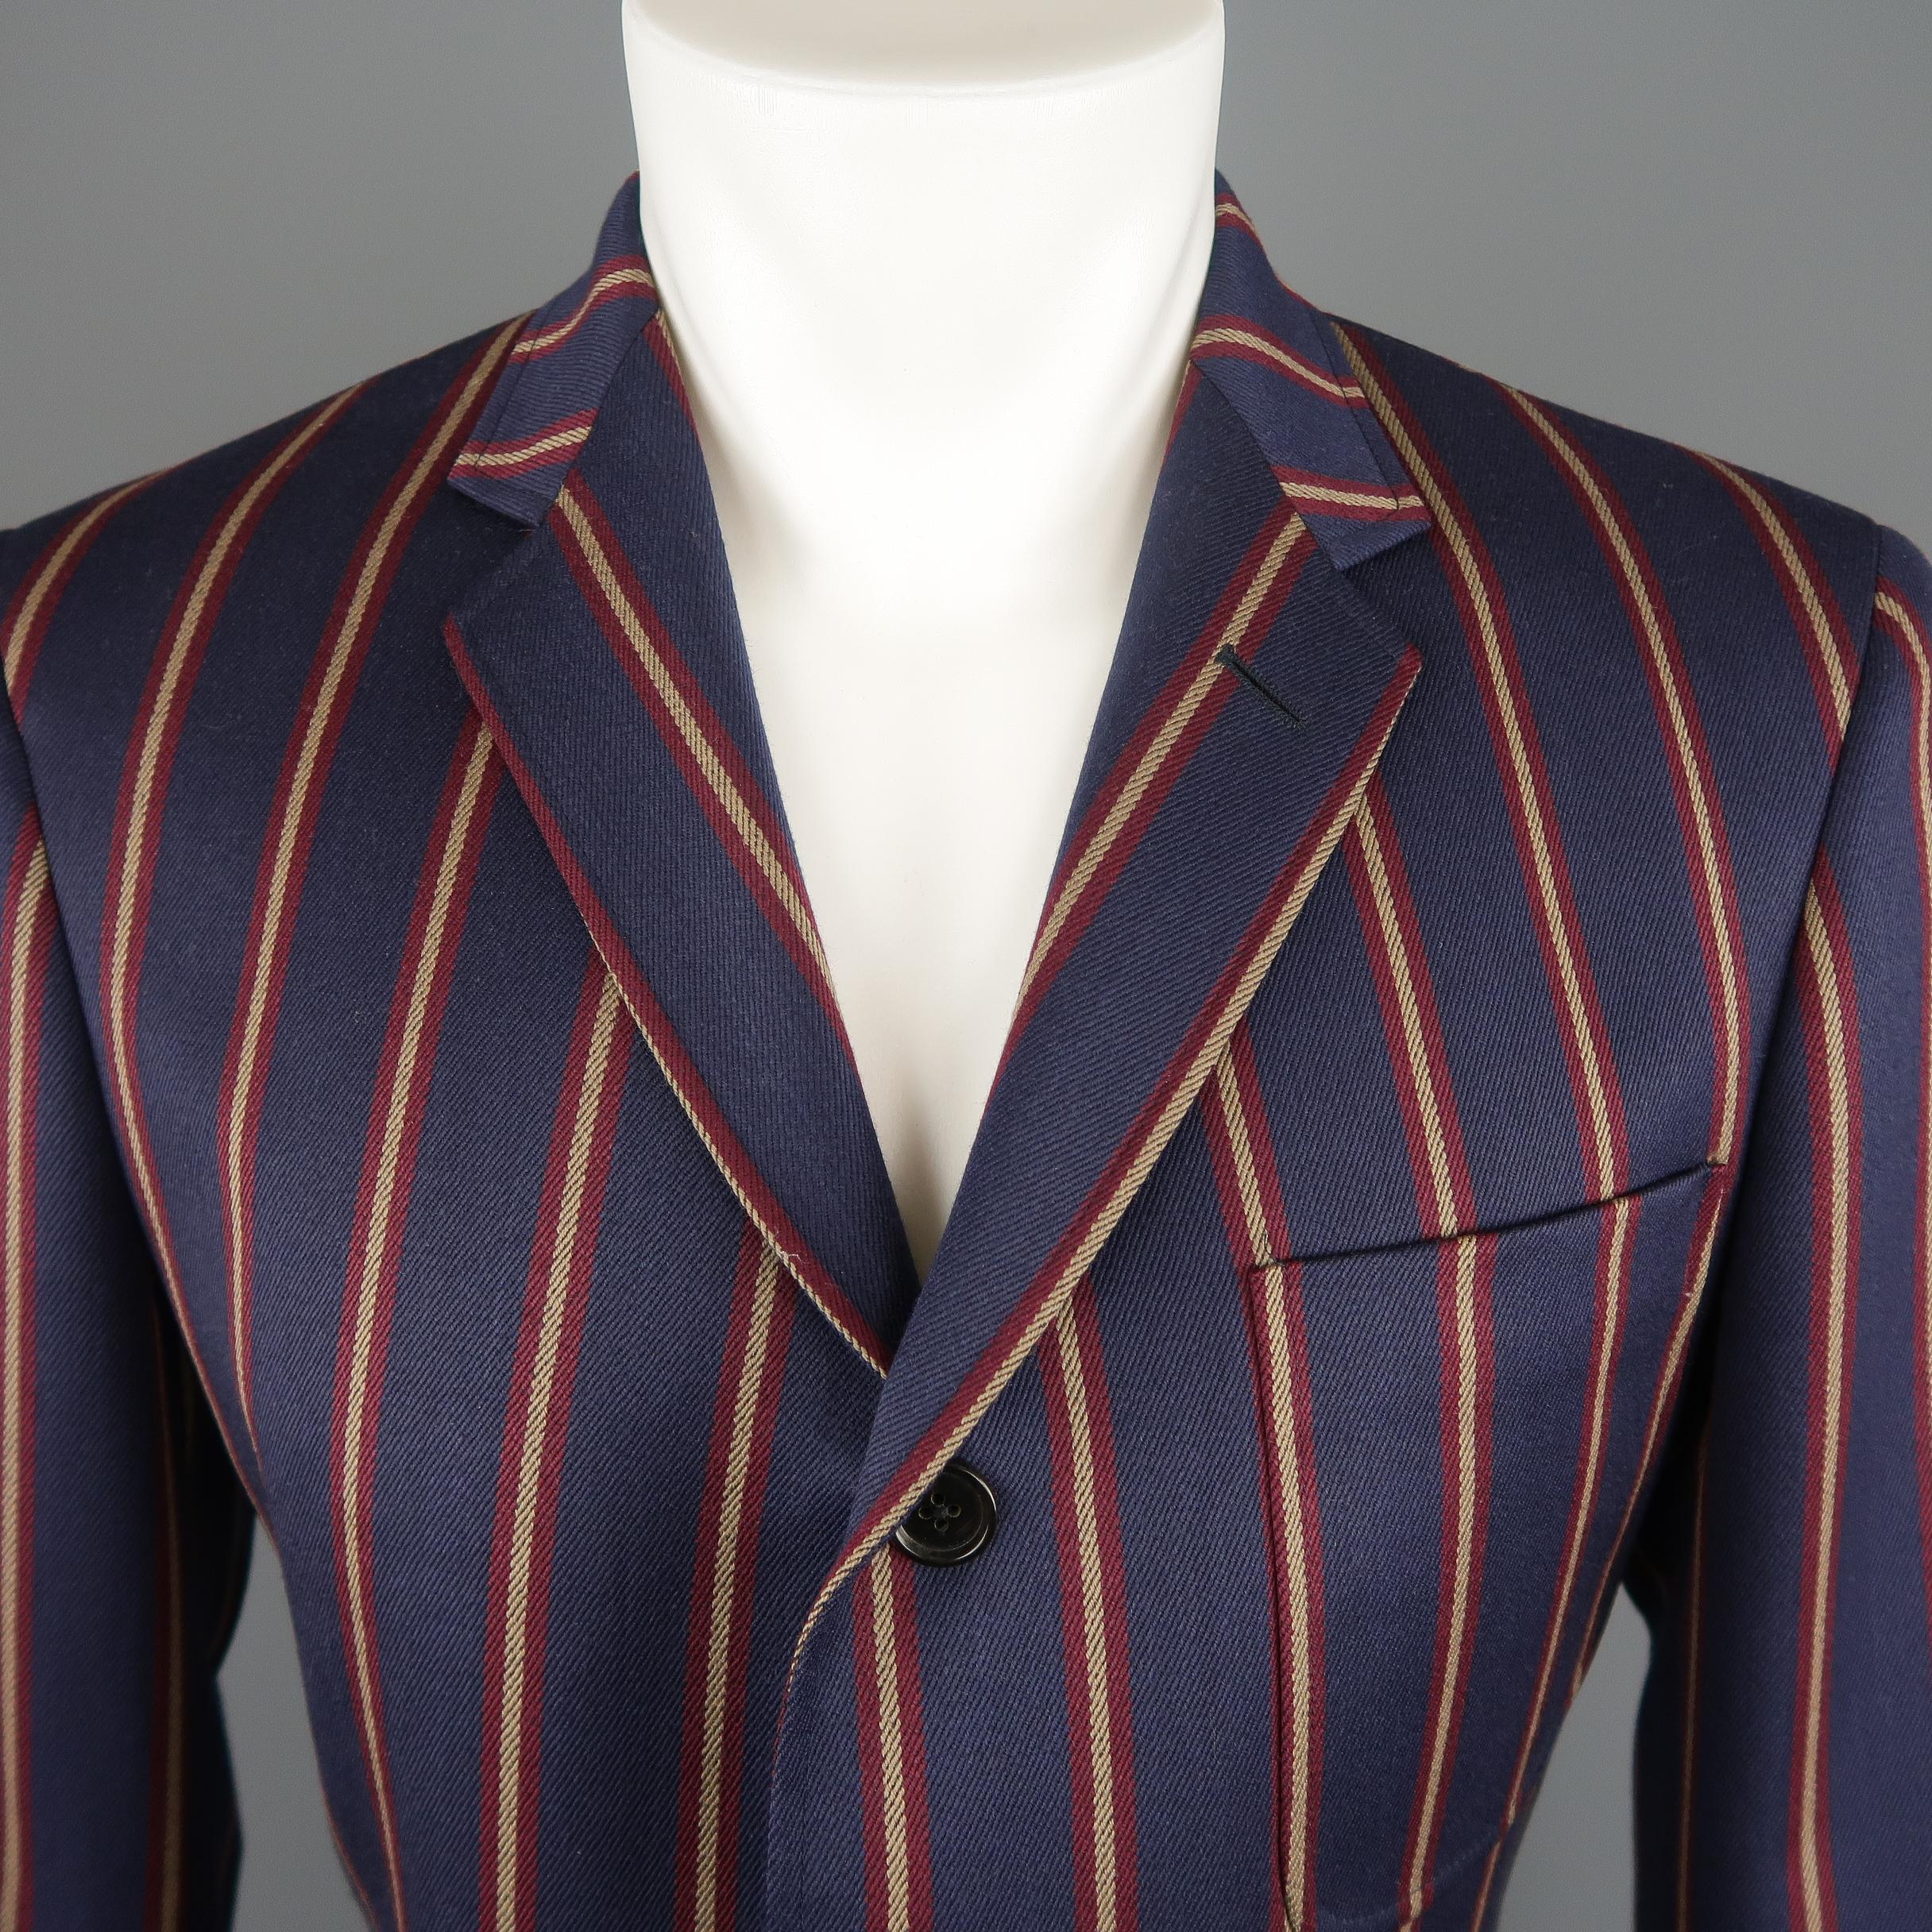 BLACK FLEECE by THOM BROWNE sport coat comes in navy wool with gold and burgundy stripe pattern,  notch lapel, single breasted, three button front, and patch pockets. Made in USA. Retail price $1,800.00. 
 
Excellent Pre-Owned Condition.
Marked: